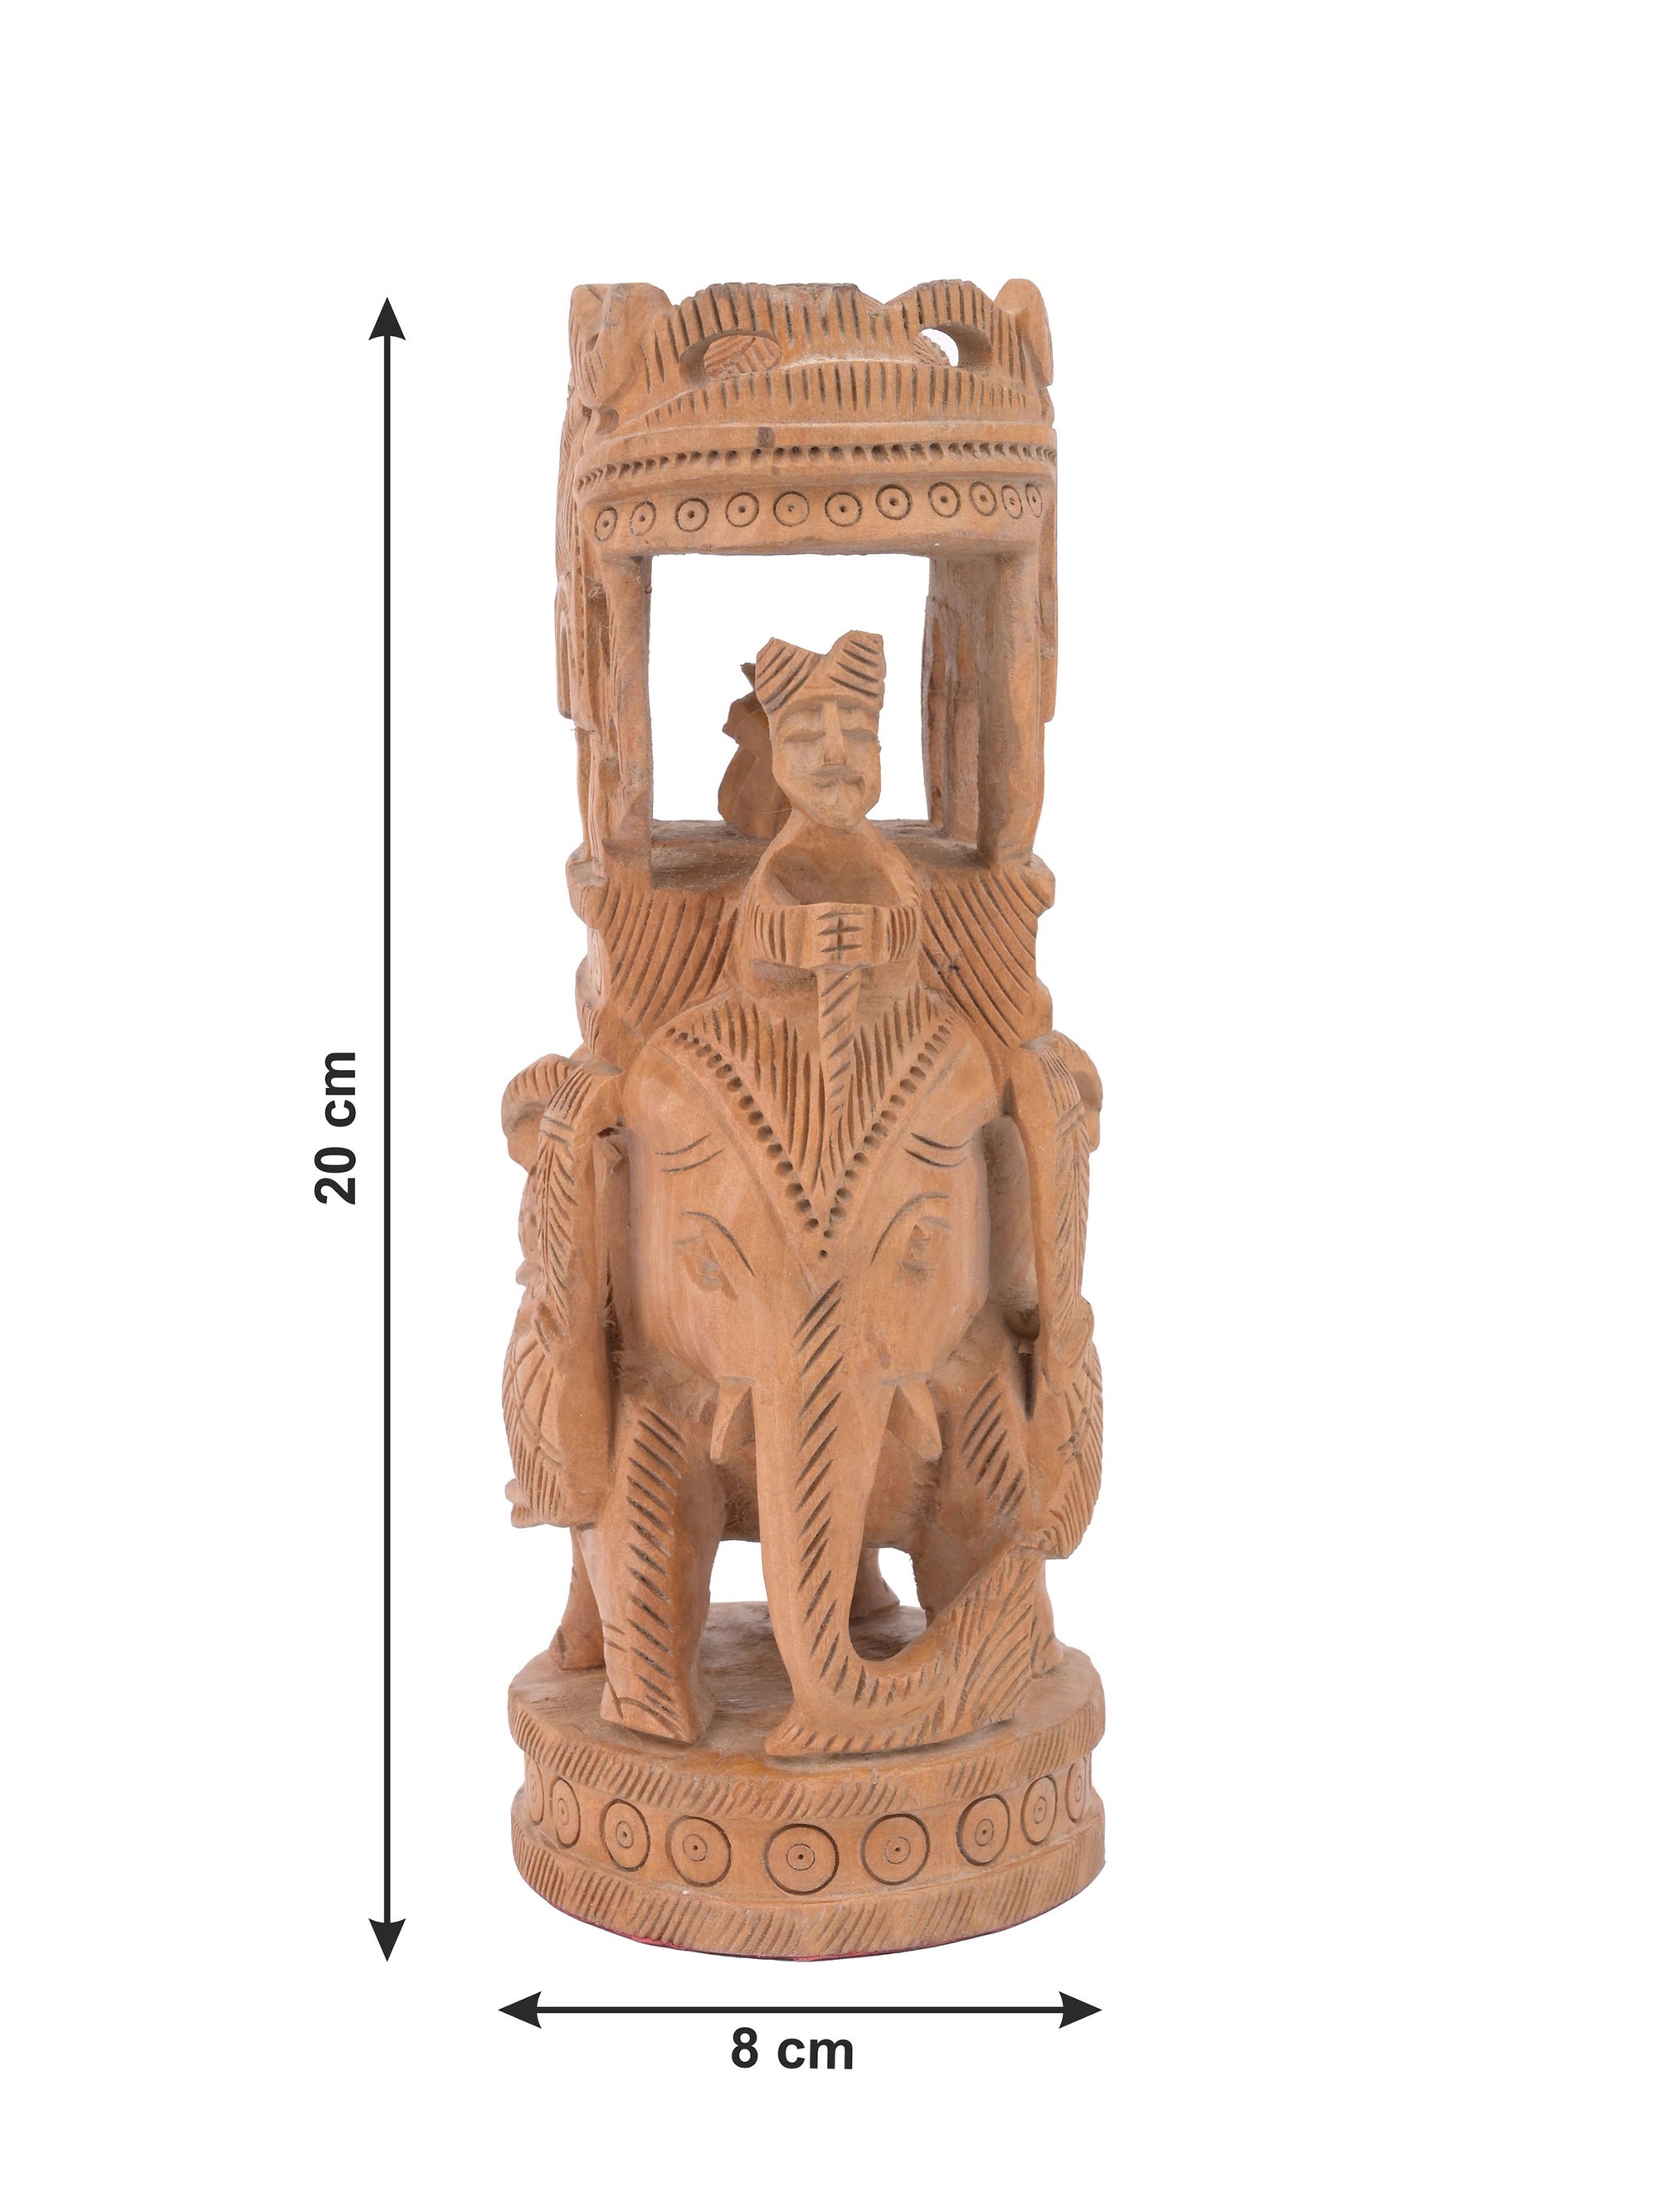 Ambabari Elephant crafted on Kadam wood - 8 inches in height - The Heritage Artifacts